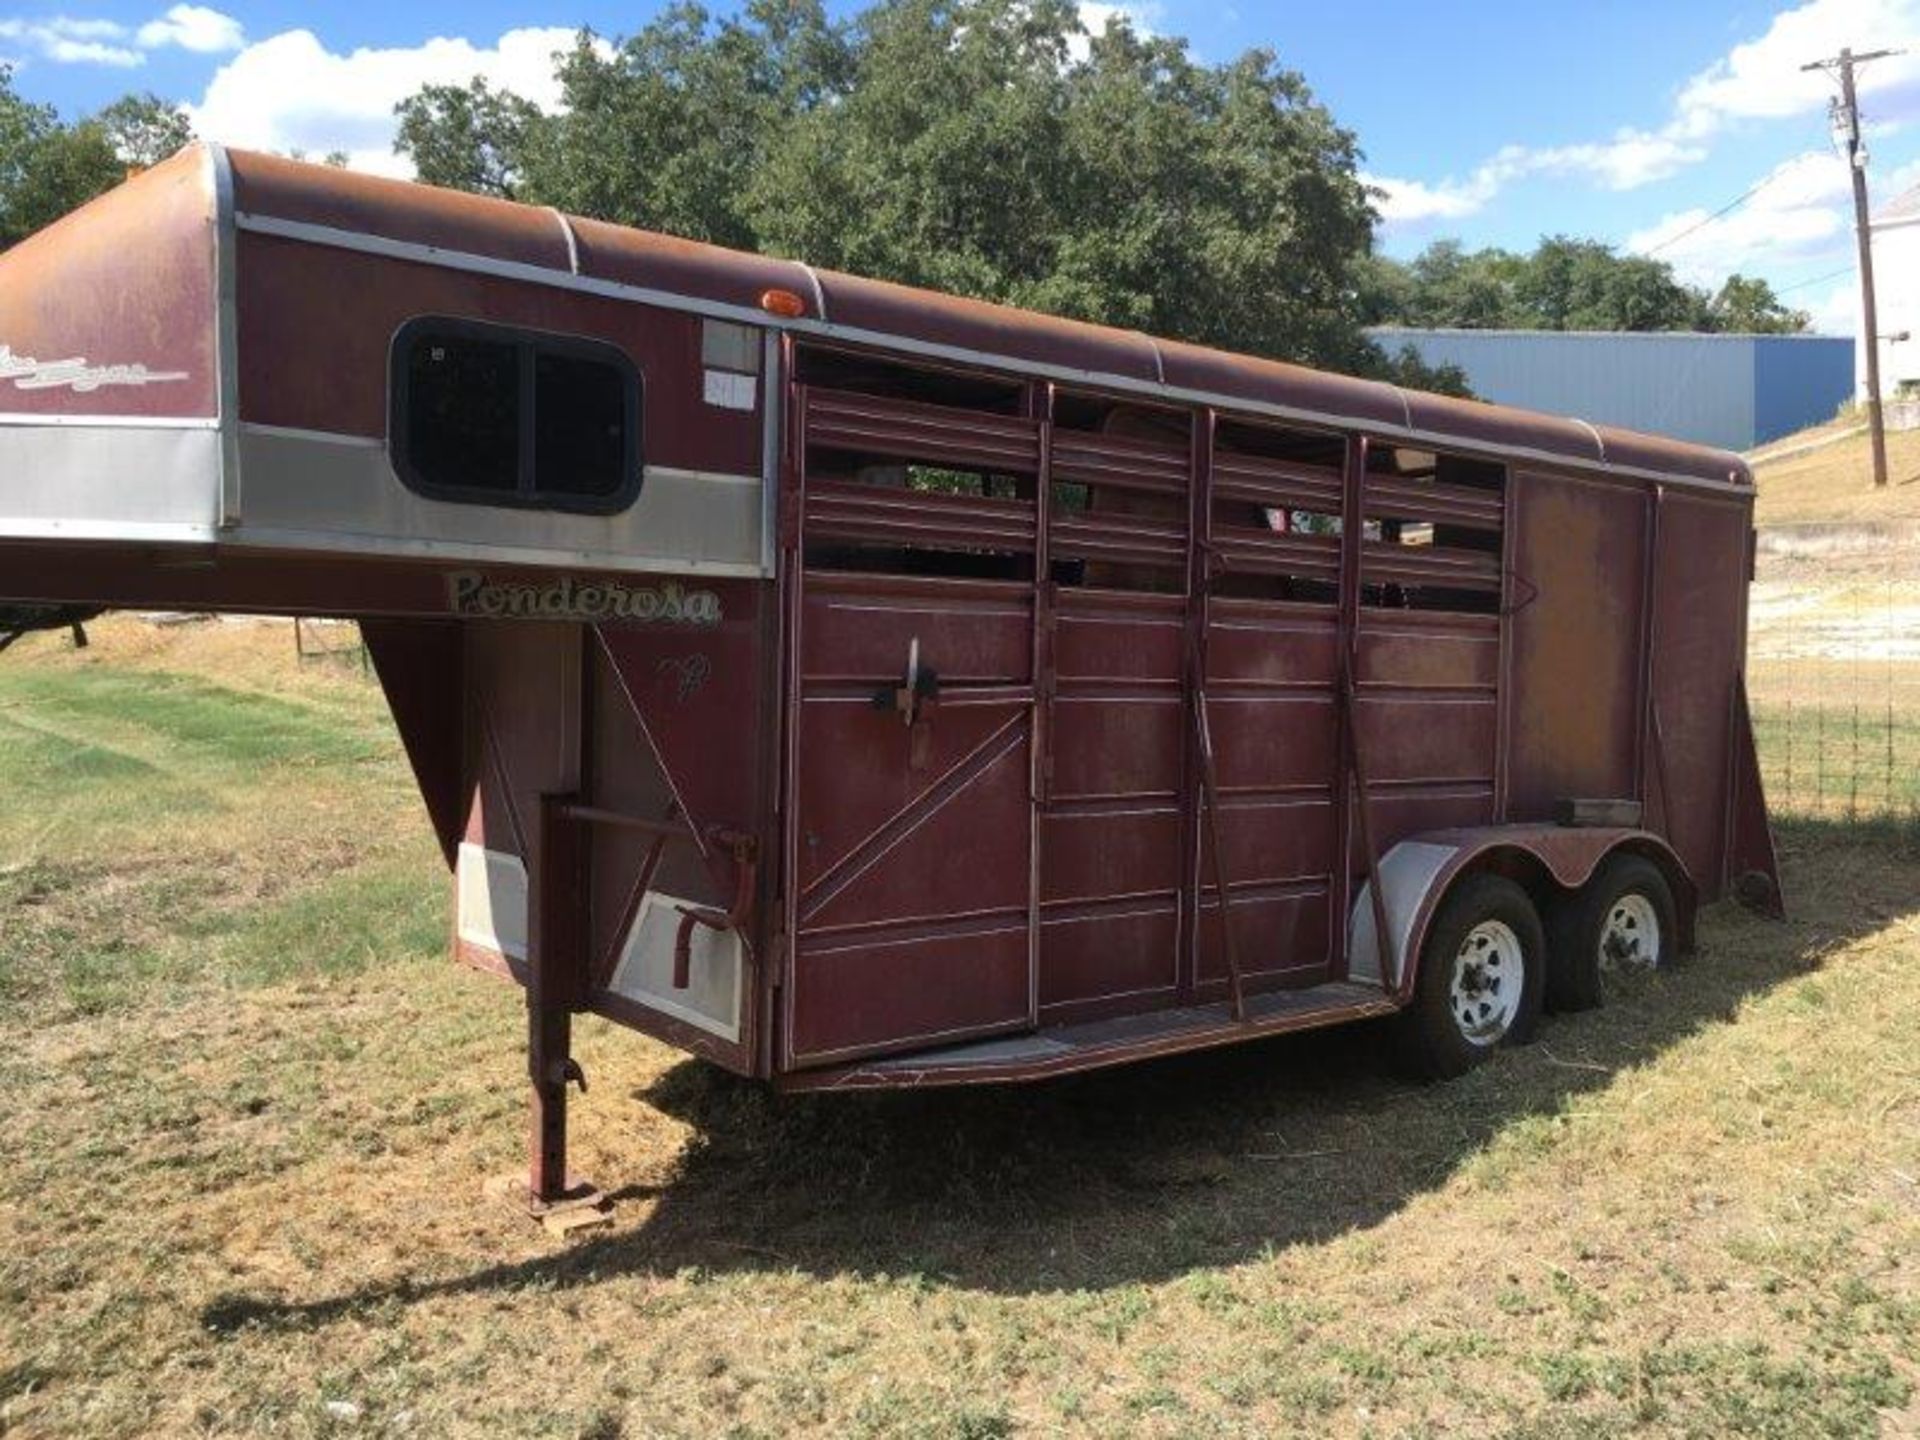 15' Ponderosa Steel Horse Trailer (LOCATION: 916 SOUTH 57TH ST, TEMPLE TX 76504) - Image 6 of 7